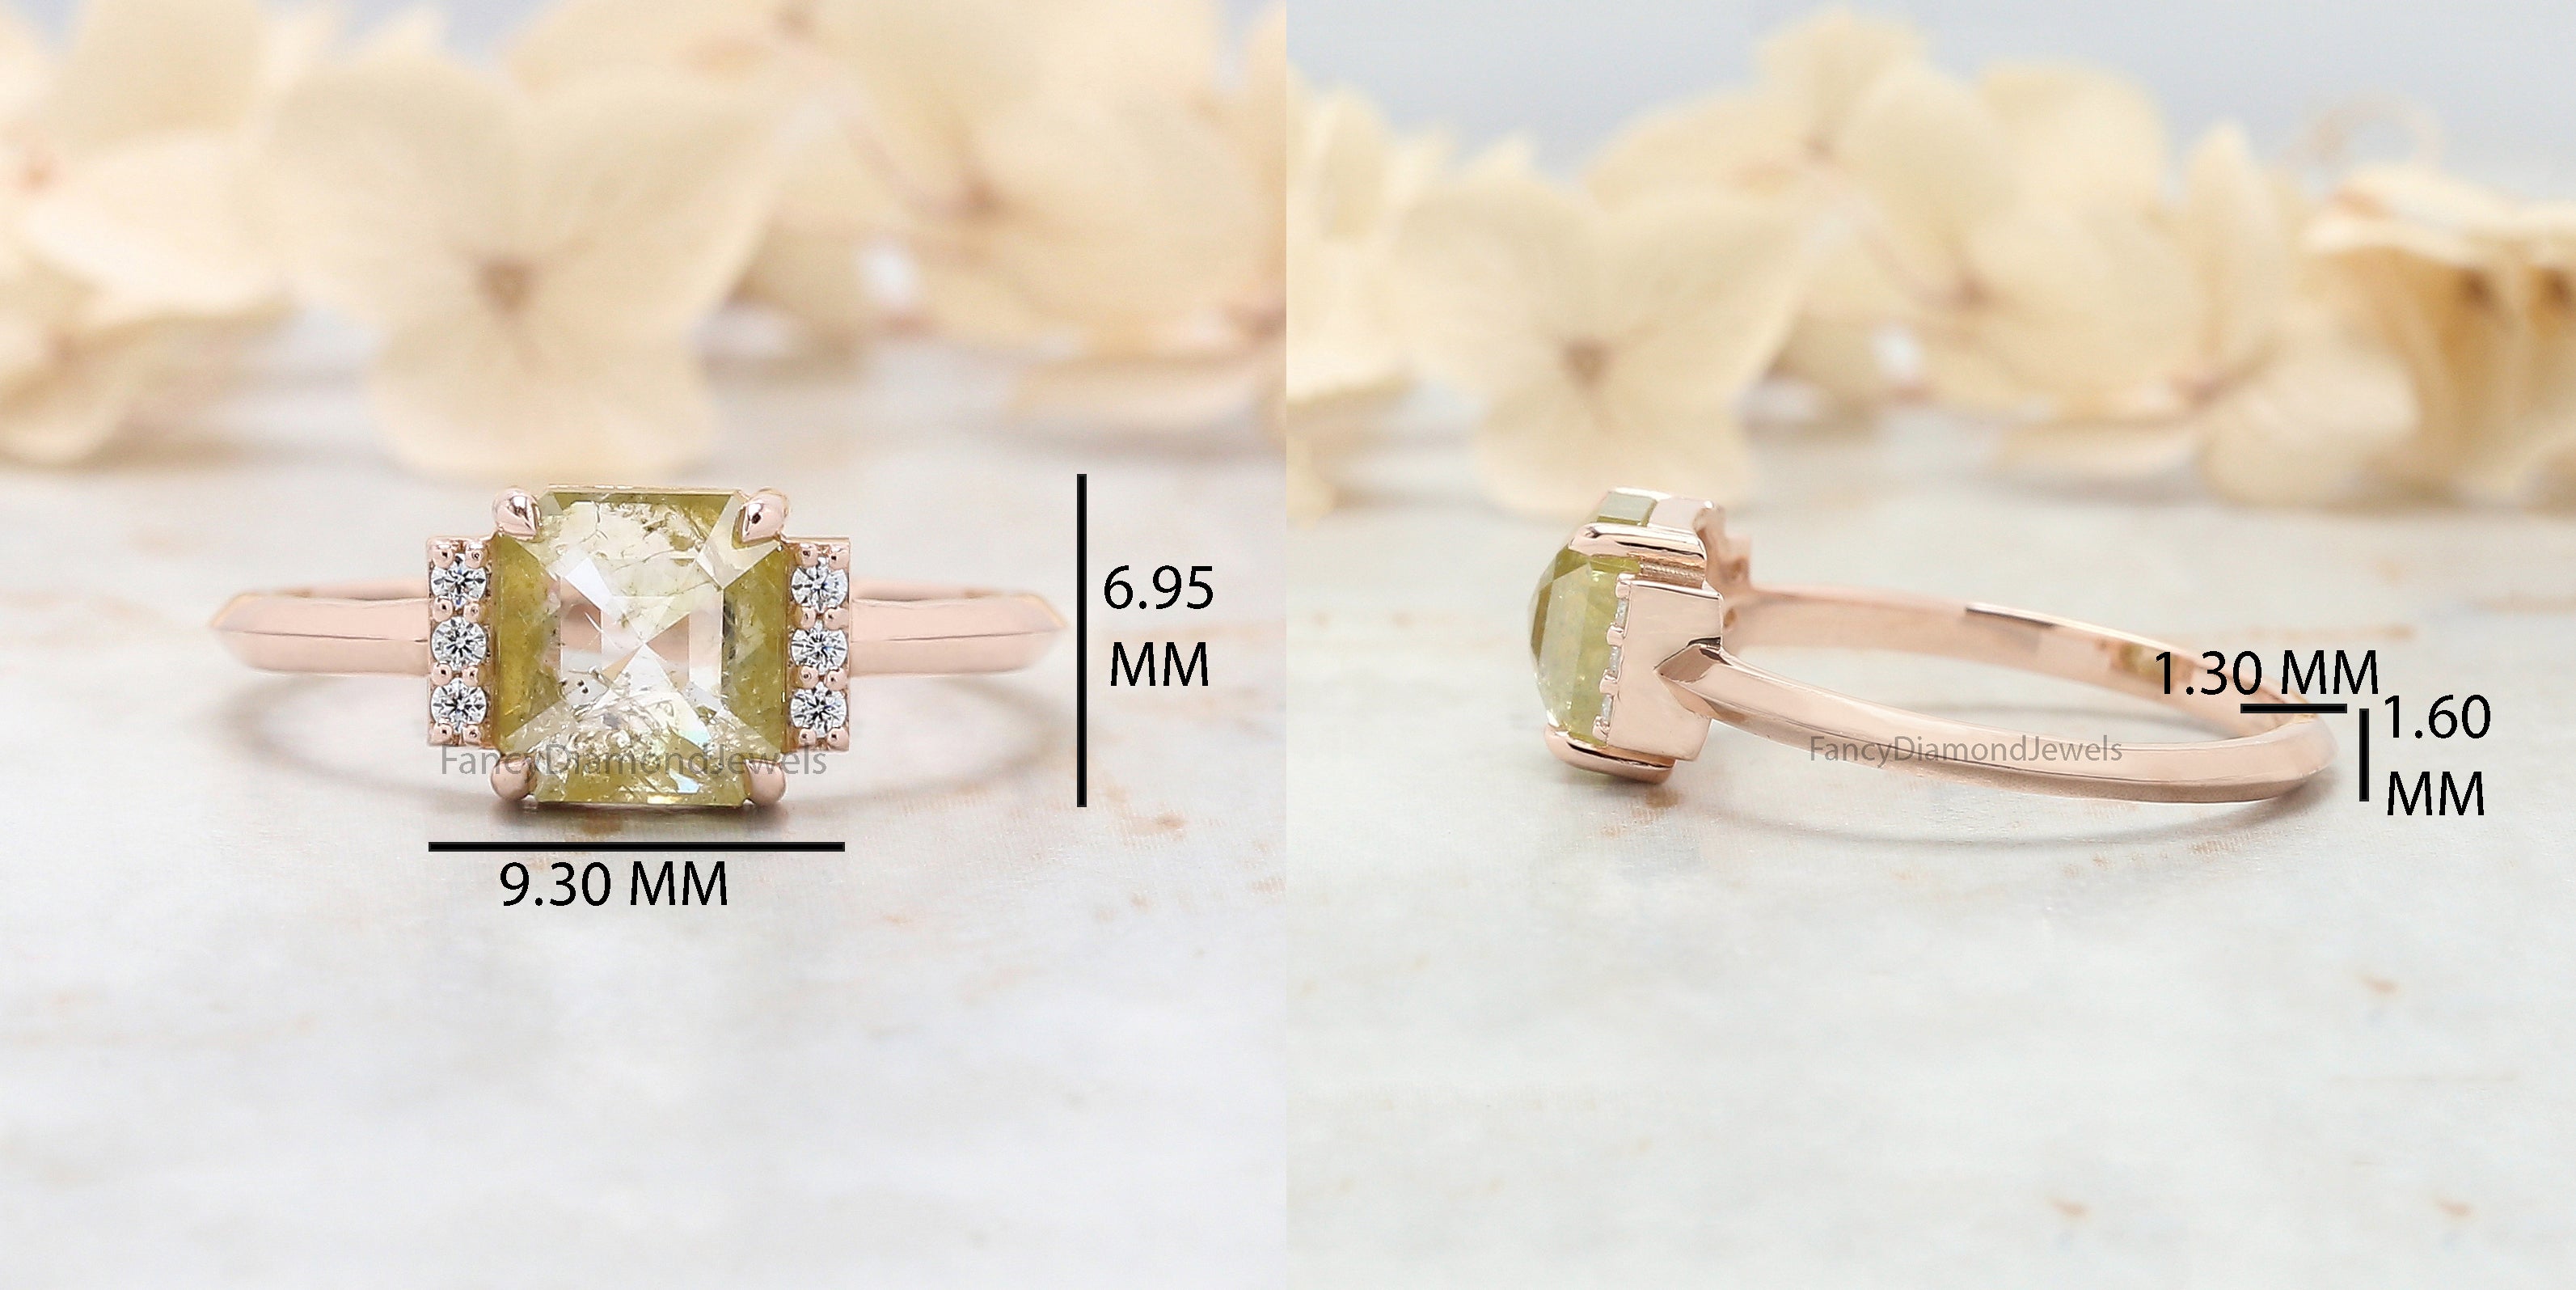 Emerald Cut Yellow Color Diamond Ring 1.69 Ct 6.90 MM Emerald Shape Diamond Ring 14K Rose Gold Silver Engagement Ring Gift For Her QL3097